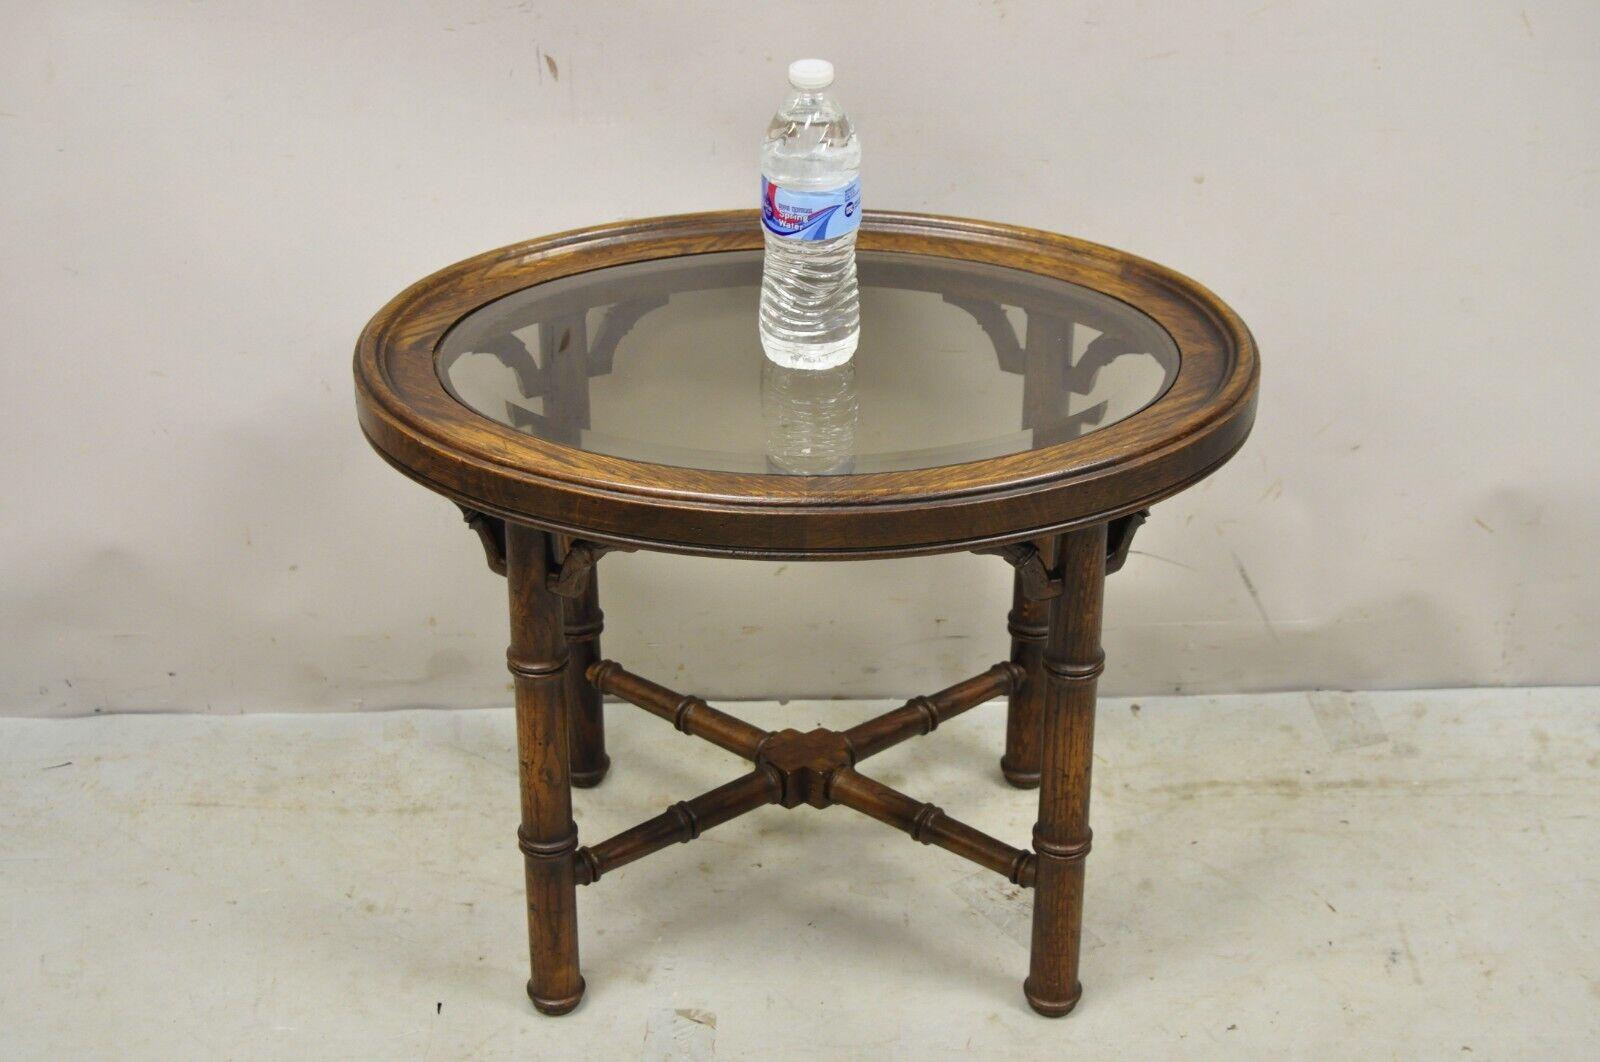 Vintage Faux Bamboo Chinese Chippendale Style Oval Small Glass Top Side Table - Pair. Item featured is a nice smaller size, oval beveled glass tops, cross stretcher base, solid wood frame, distressed finish, very nice vintage pair, great style and